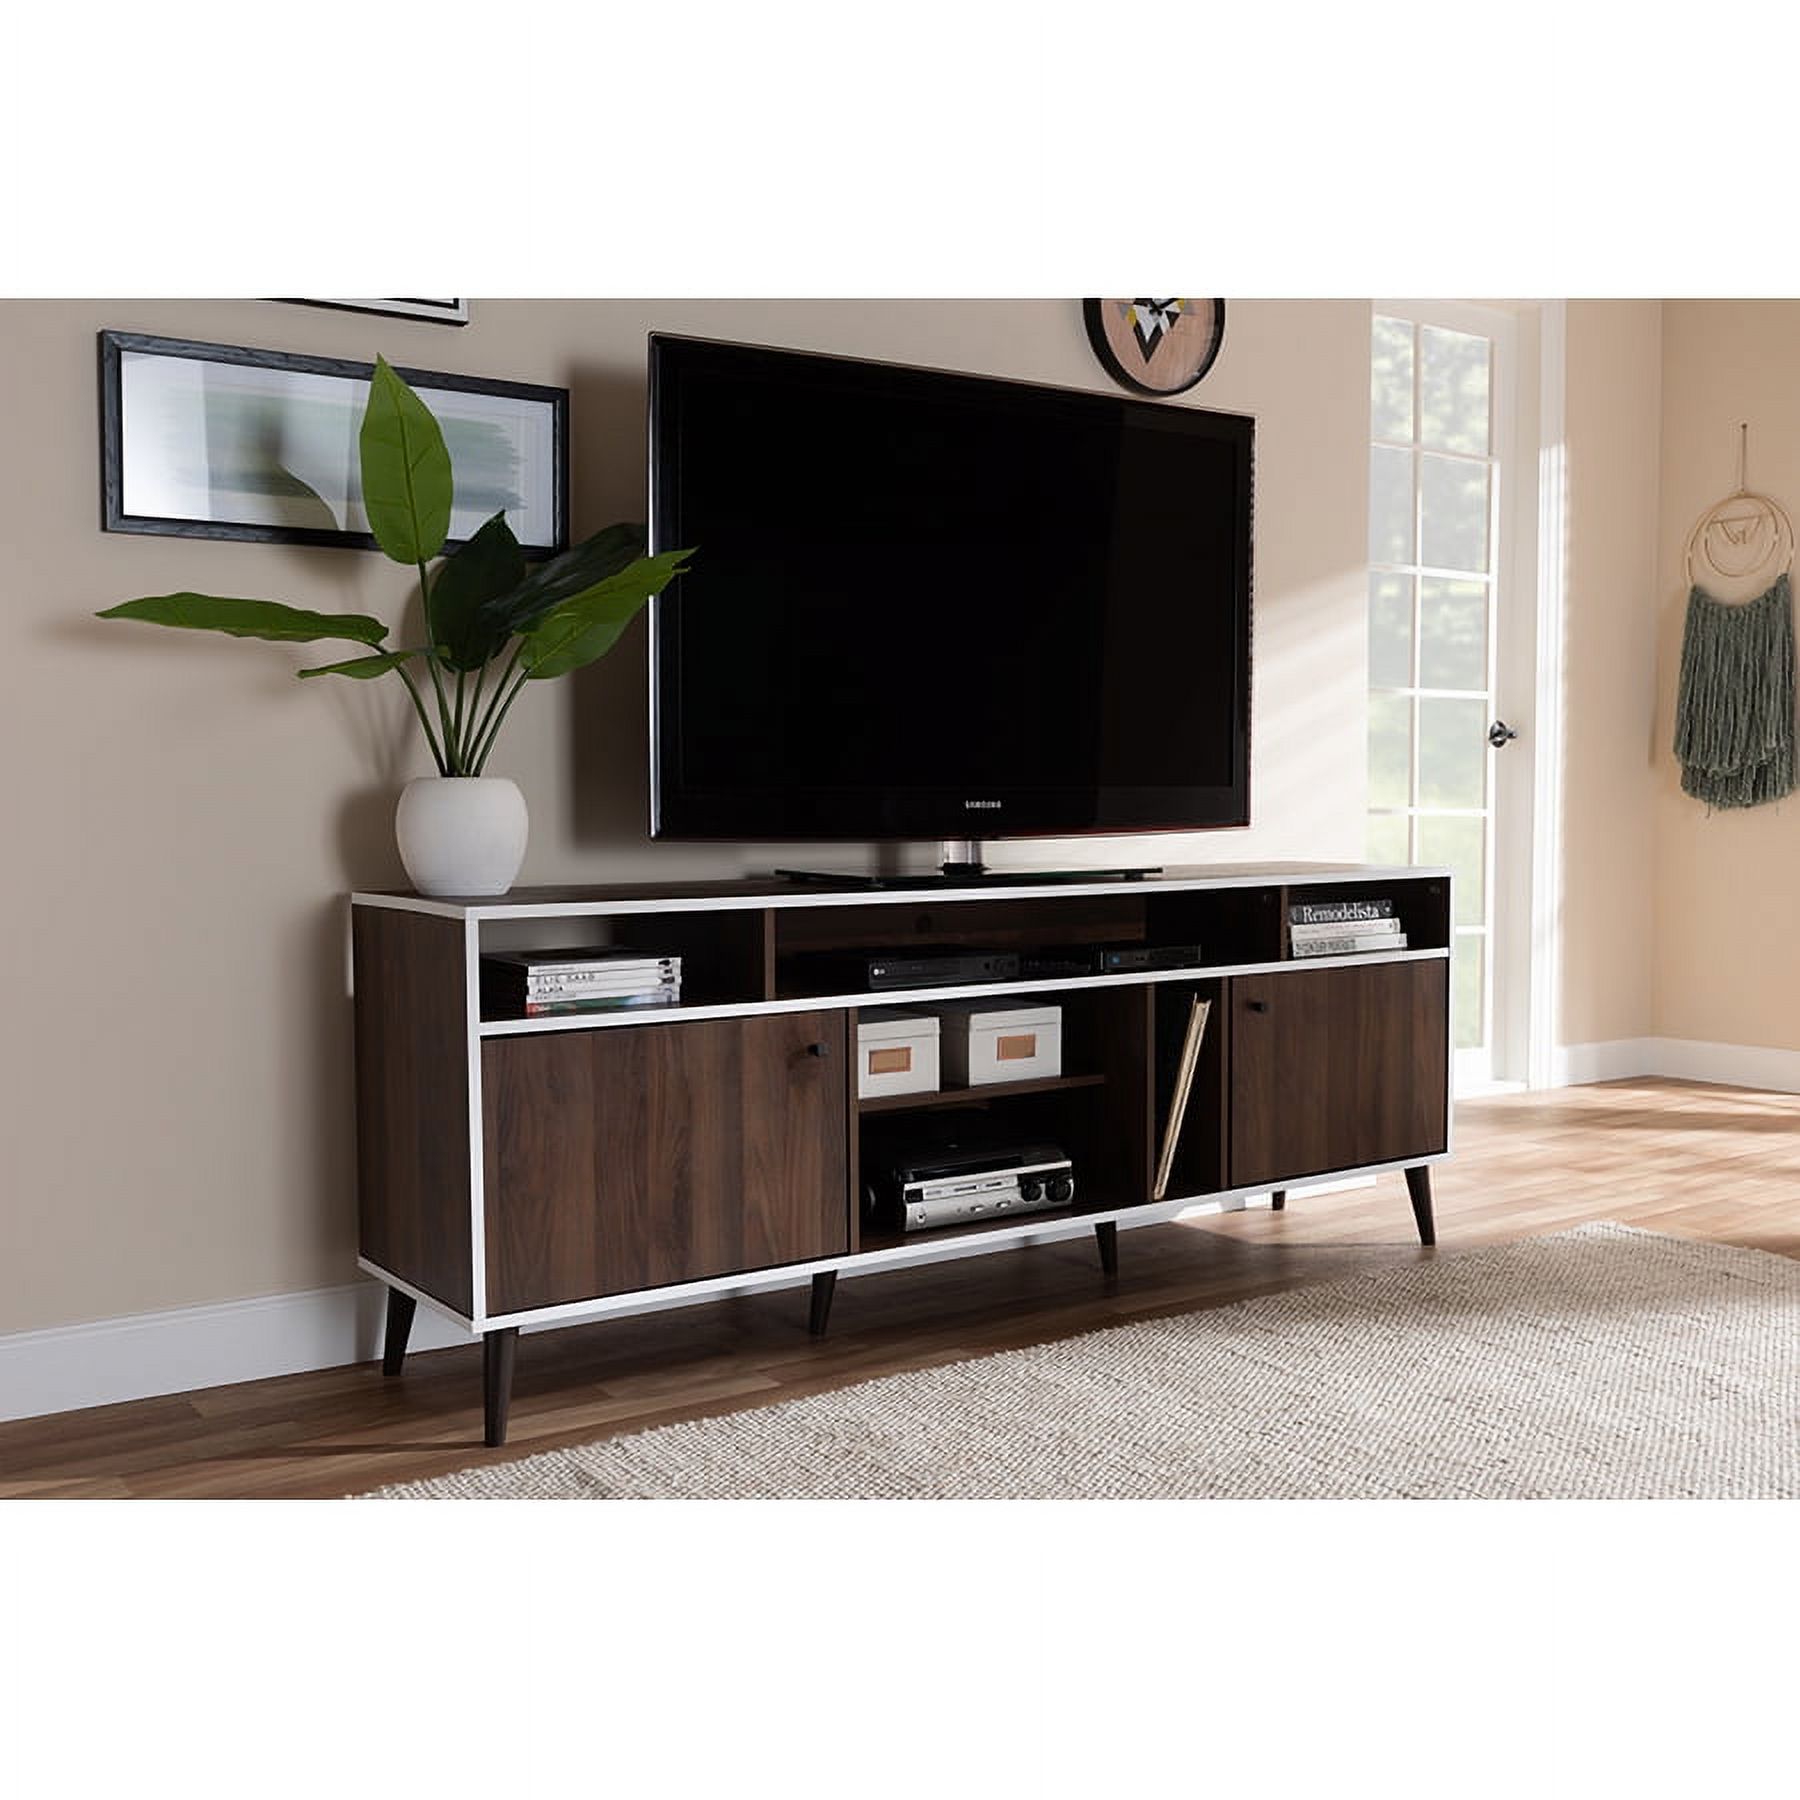 Baxton Studio Marion Mid-Century Modern Brown and White Finished TV Stand - image 1 of 7